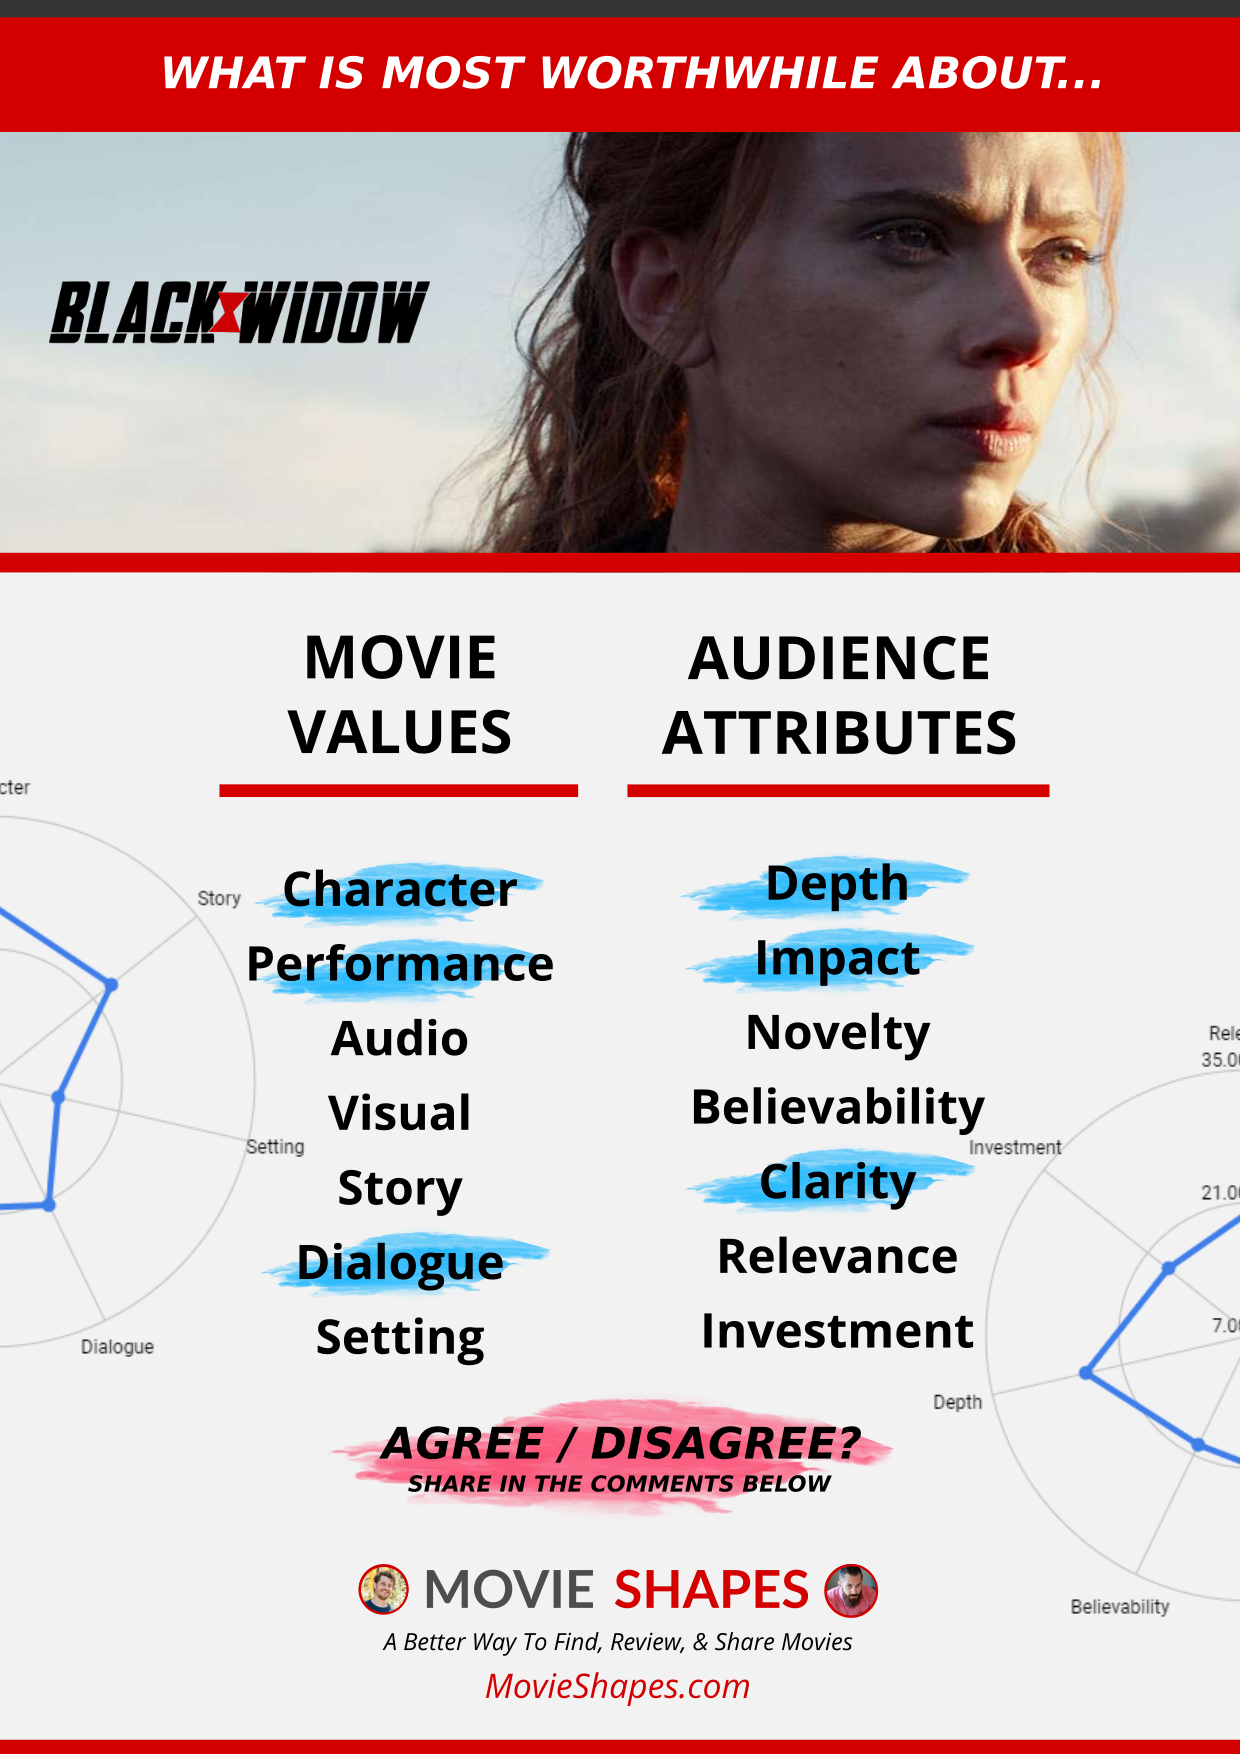 Movie Shapes Top 3 Promo Graphic for a movie - Audience Attributes - Movie Values